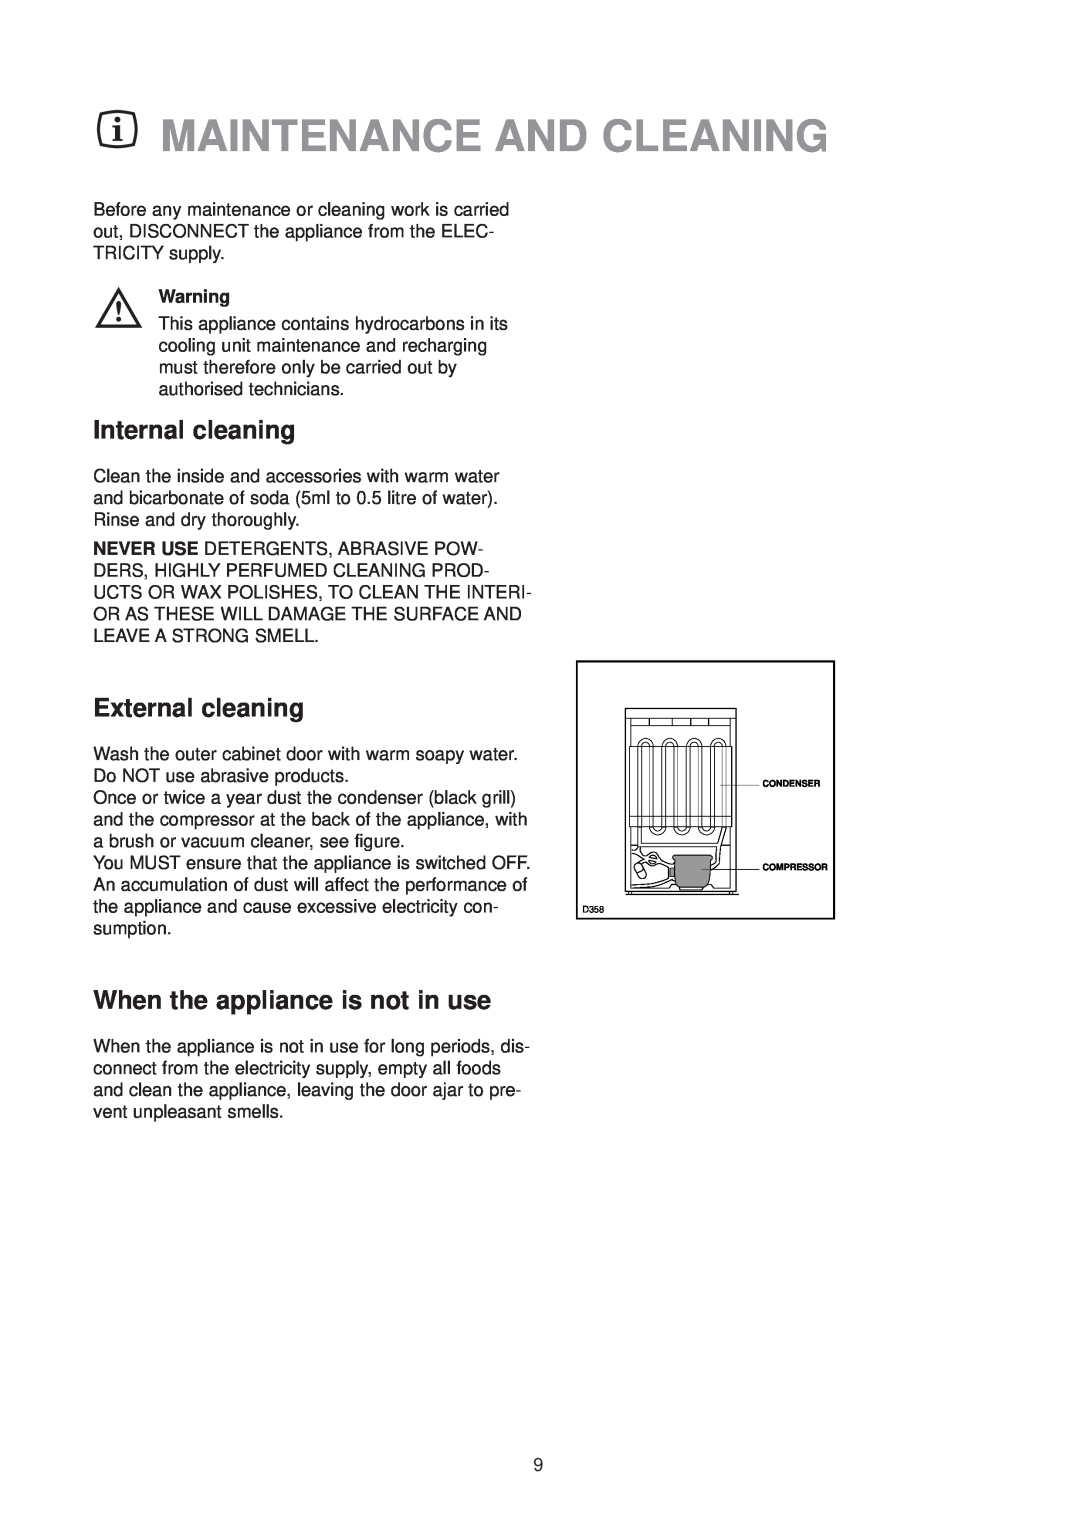 Zanussi ZV 48 RF manual Maintenance And Cleaning, Internal cleaning, External cleaning, When the appliance is not in use 